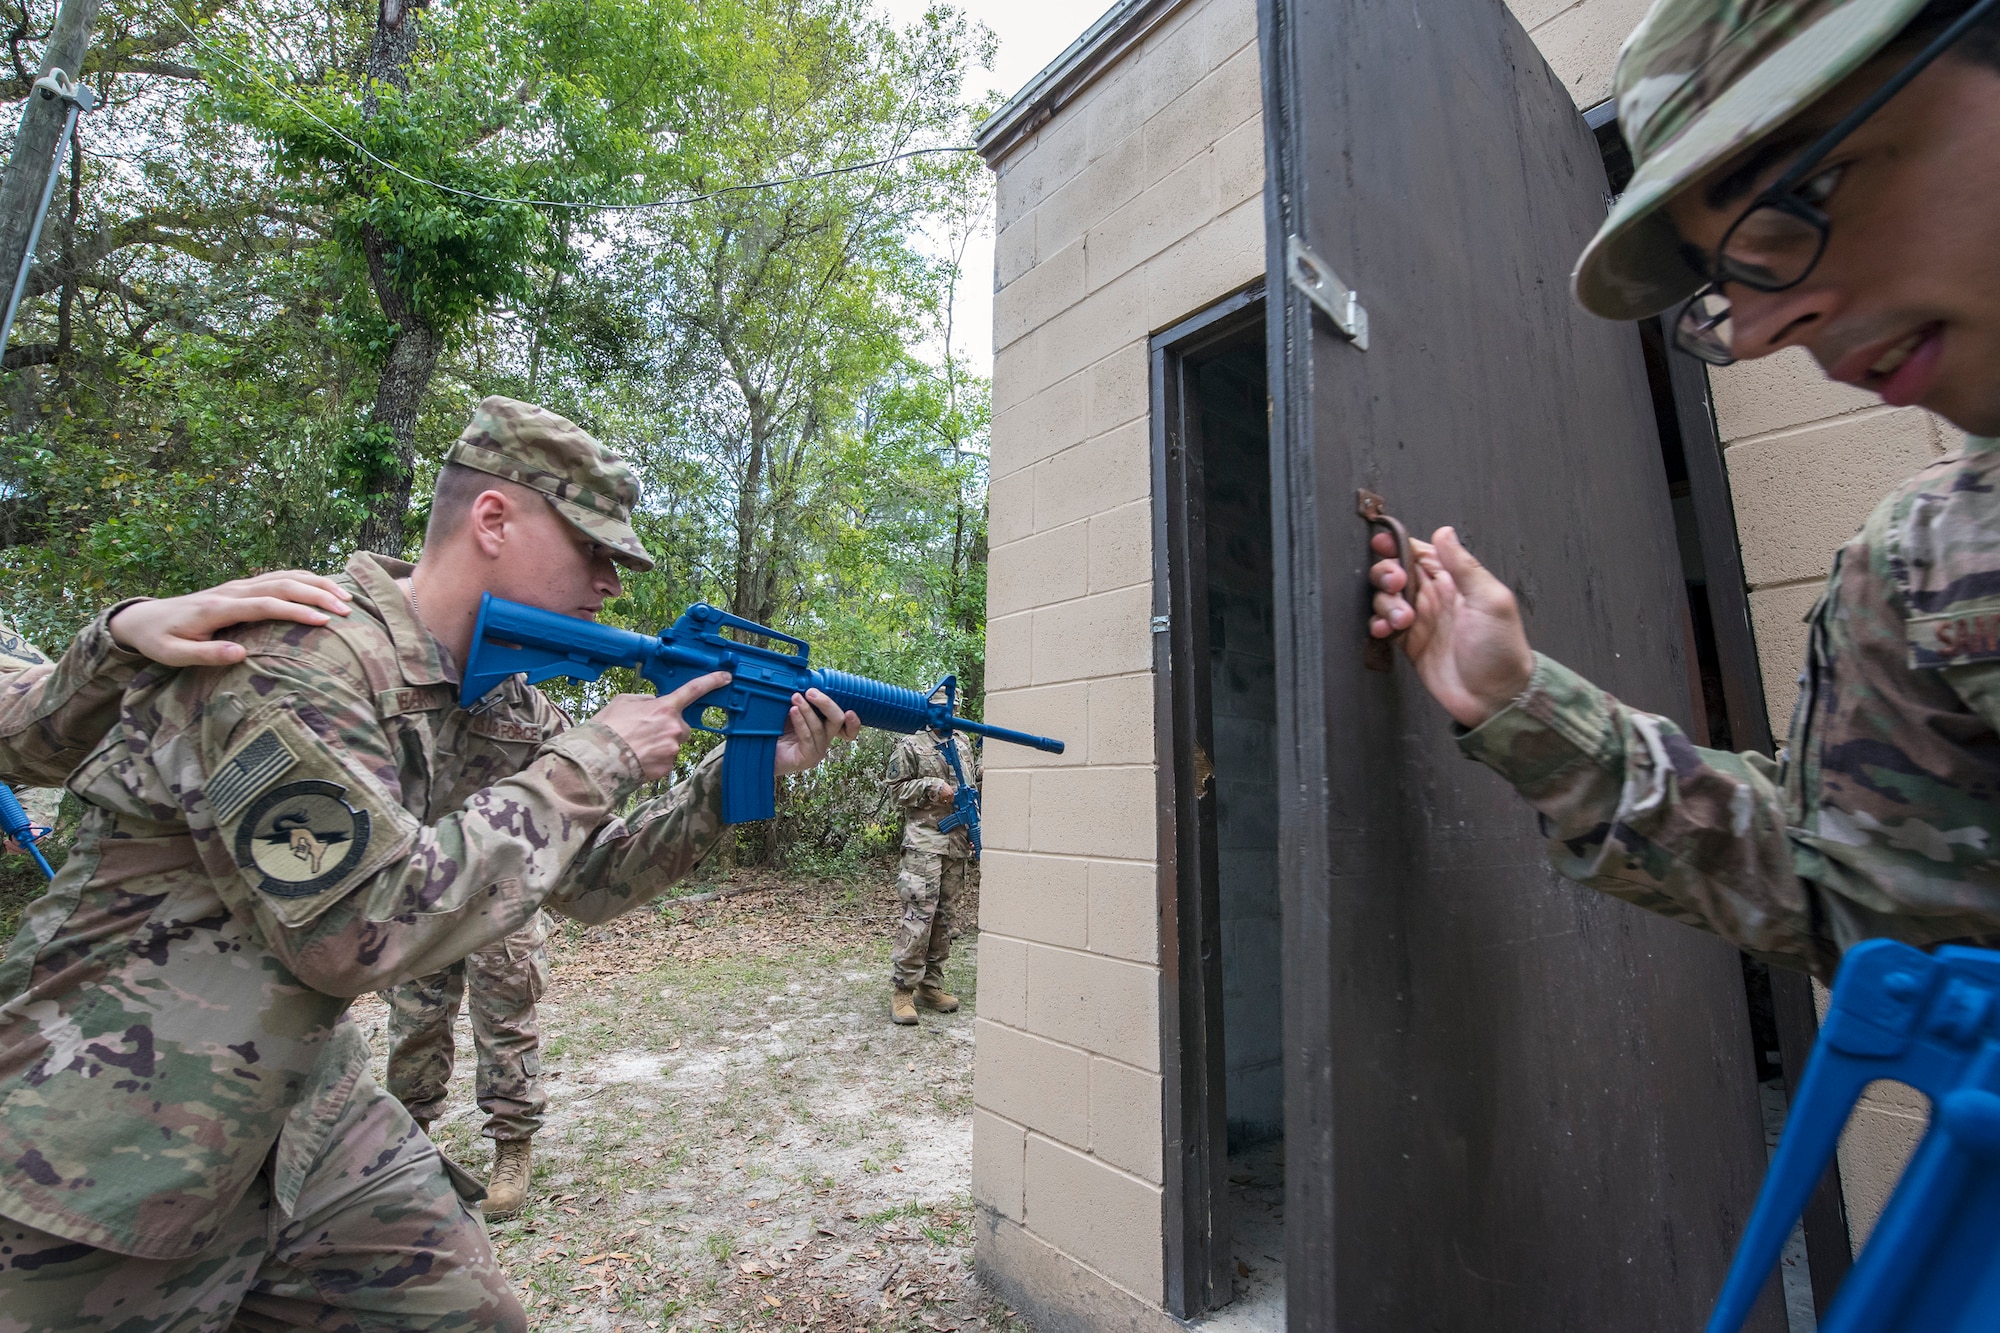 Airmen 1st Class David Medeiros, 824th Base Defense Squadron fireteam member, left, prepares to enter a building during dismounted operations training, March 27, 2018, at Moody Air Force Base, Ga. The dismounted ops training is part of an Initial Qualification Training, which gives new Airmen coming into the 820th Base Defense Group an opportunity to learn a baseline of basic combat skills that will be needed to successfully operate within a cohesive unit while in a deployed environment. (U.S. Air Force photo by Airman Eugene Oliver)